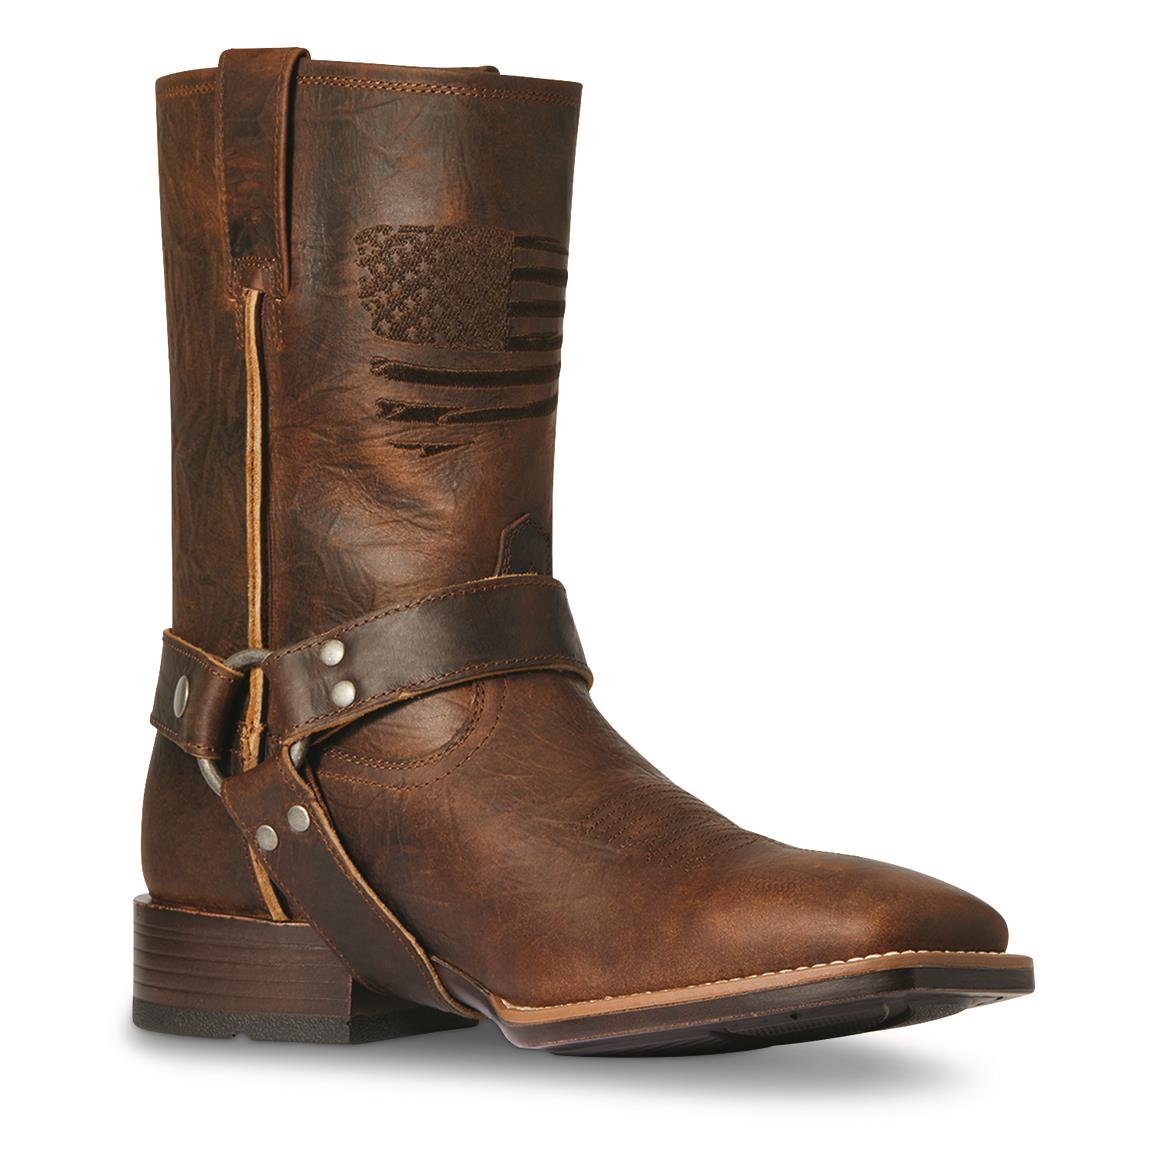 Details about   New Guide Gear Men's 12  Cowboy Boots W/ Stitching Sizes 8-13 Brown And Black 